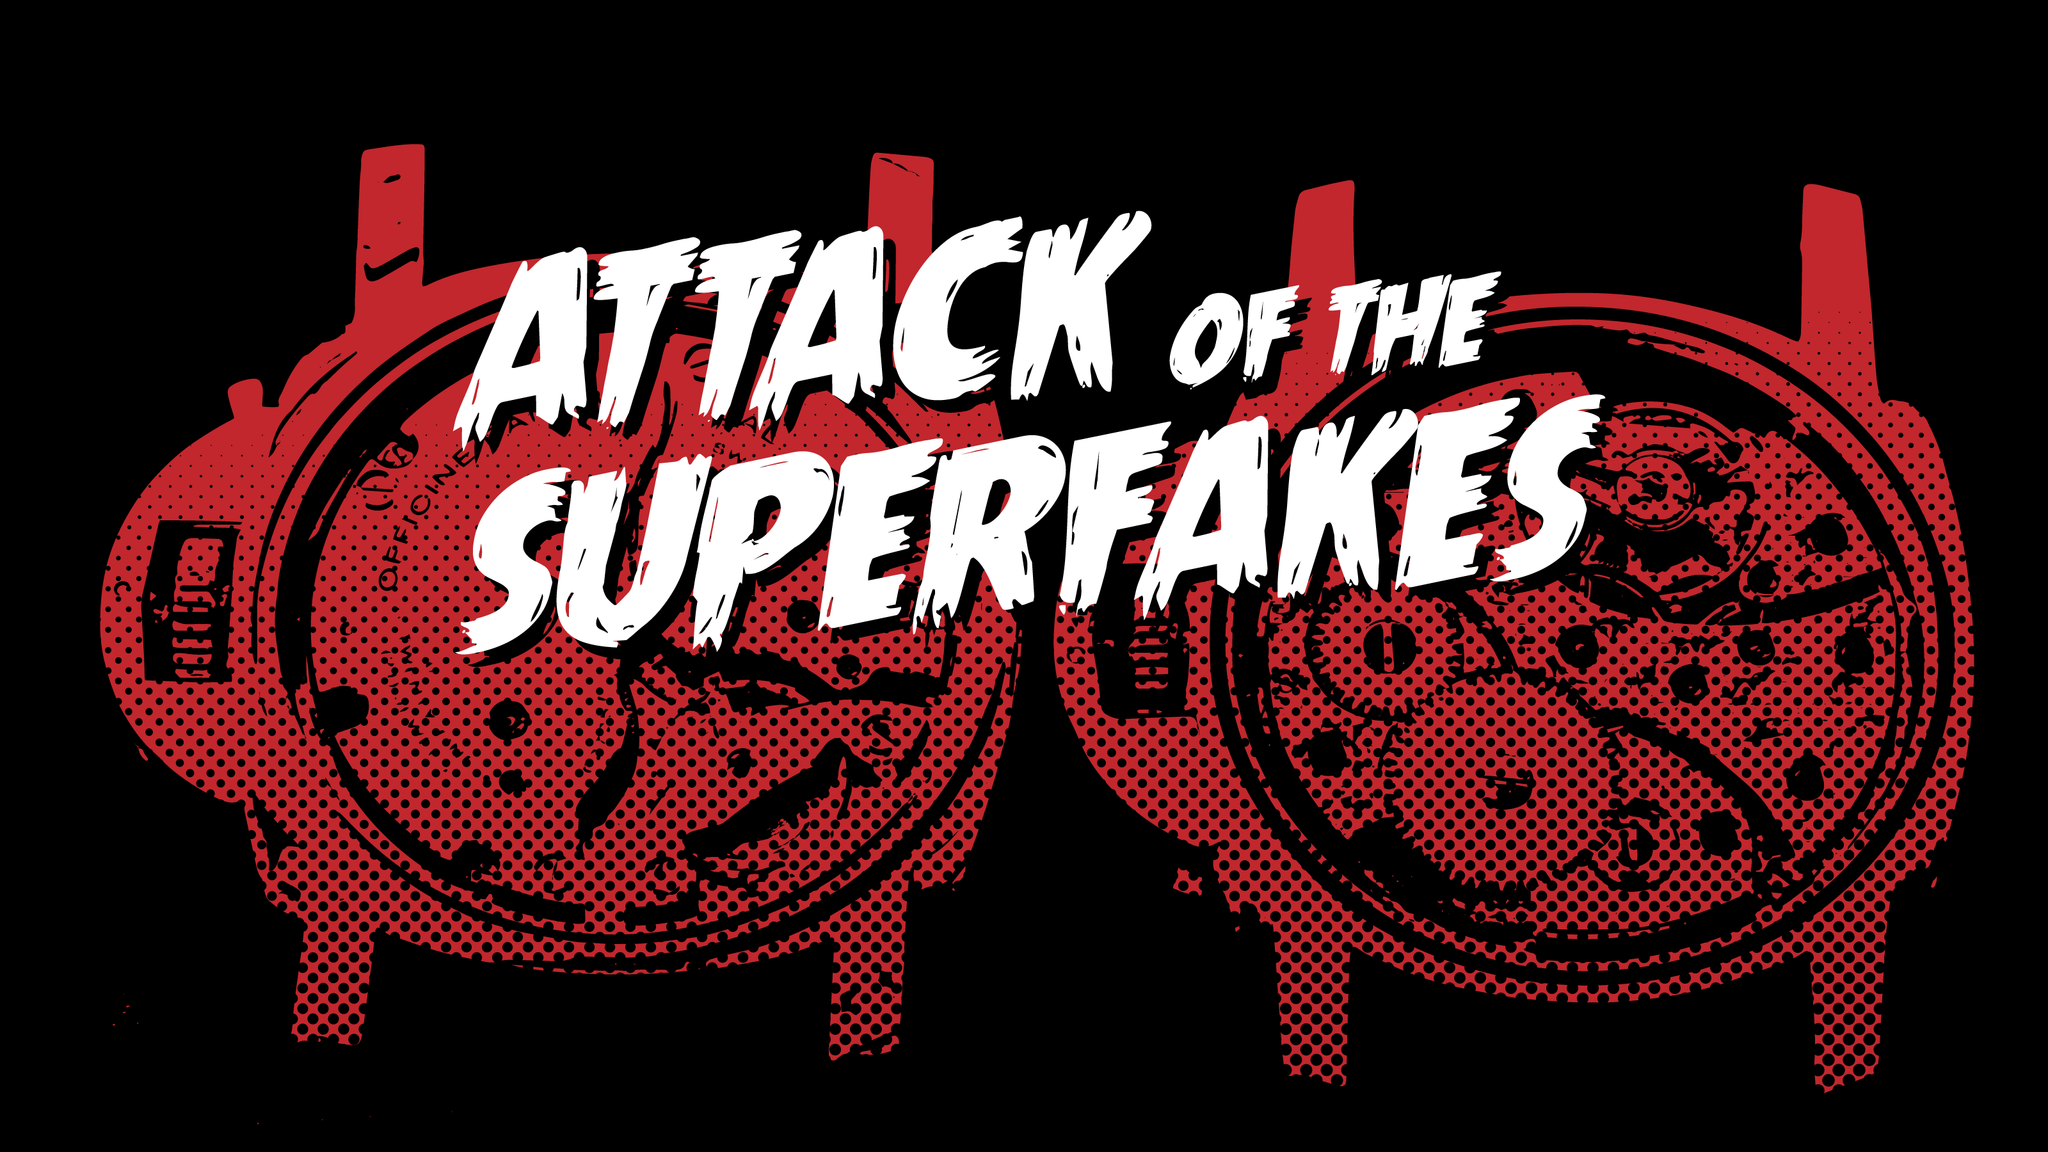 The attack of the SuperFakes